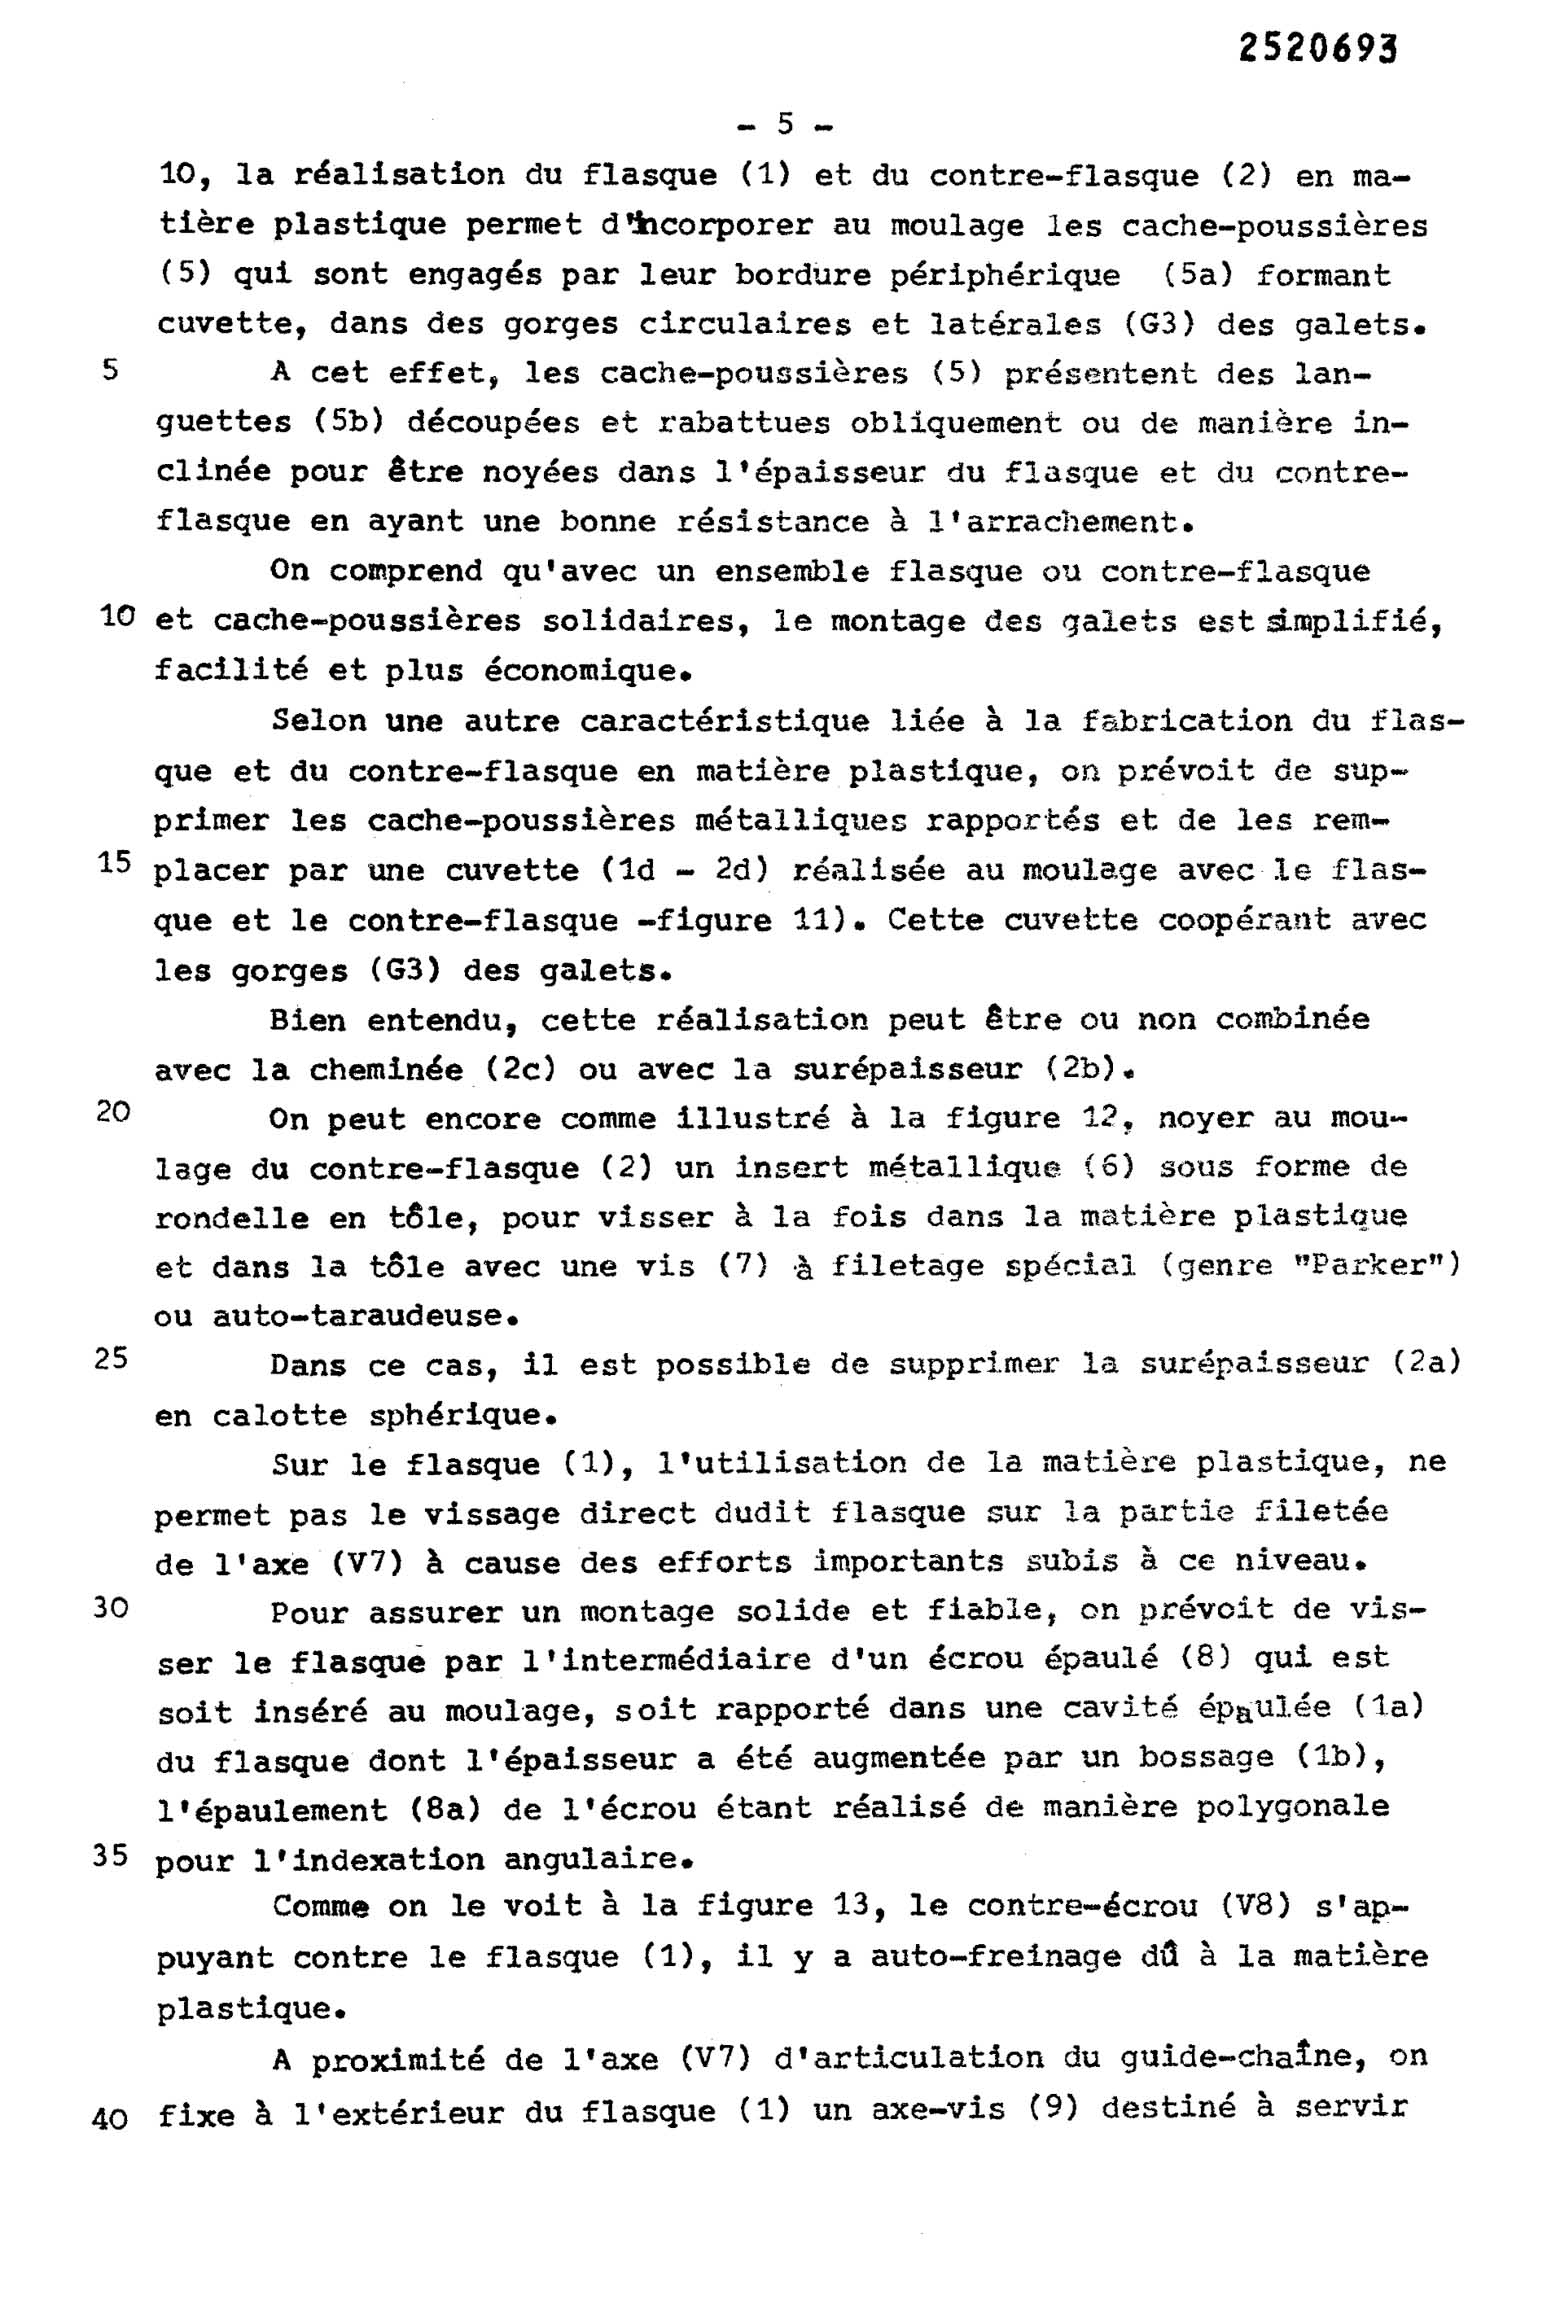 French Patent 2,520,693 - Simplex scan 006 main image